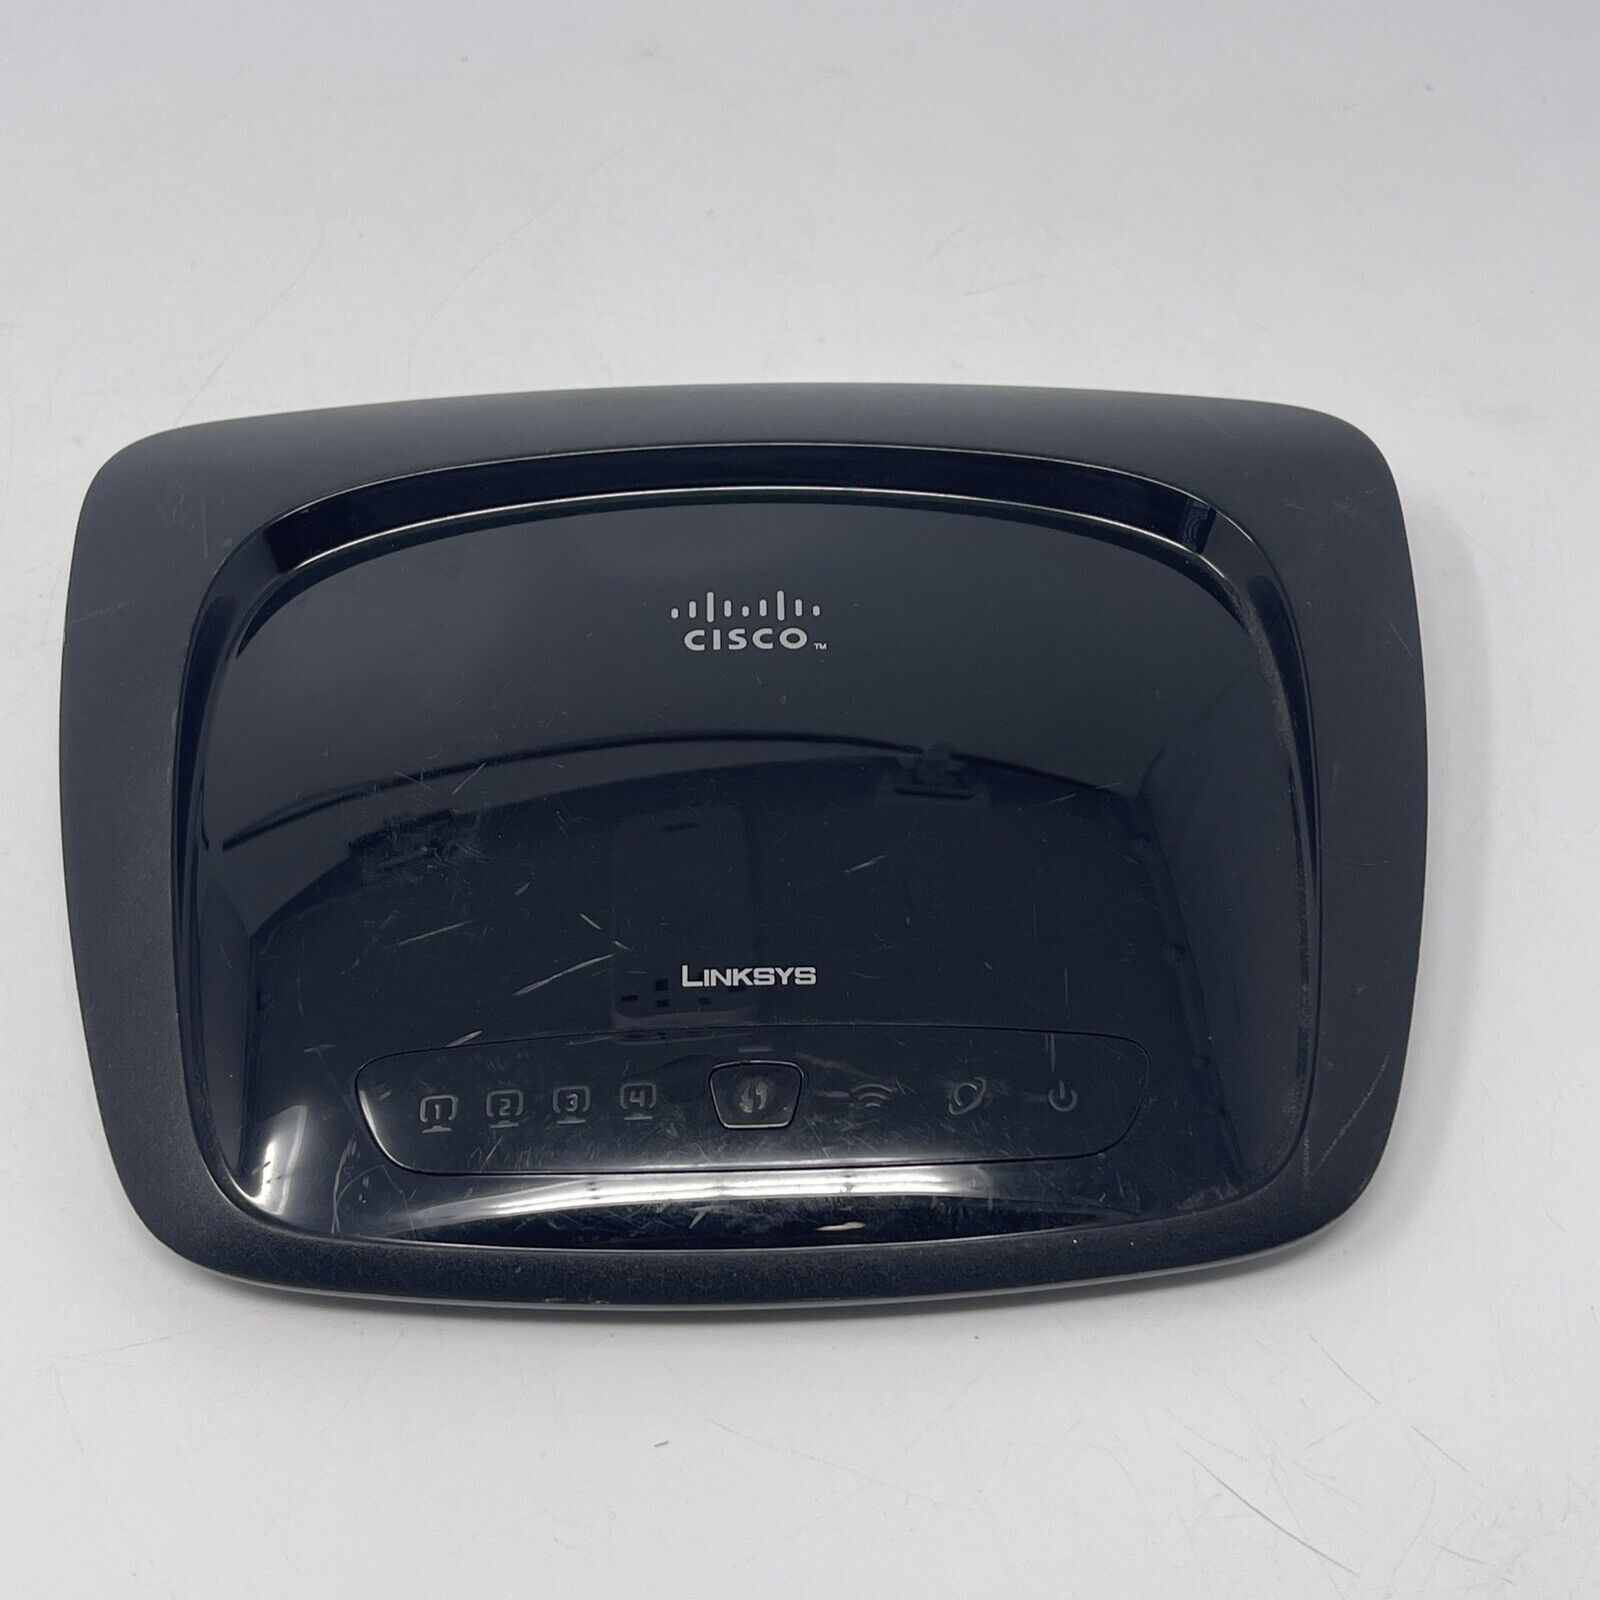 Cisco Linksys WRT110 Dual Band RangePlus Wireless Router  Only - No Cables